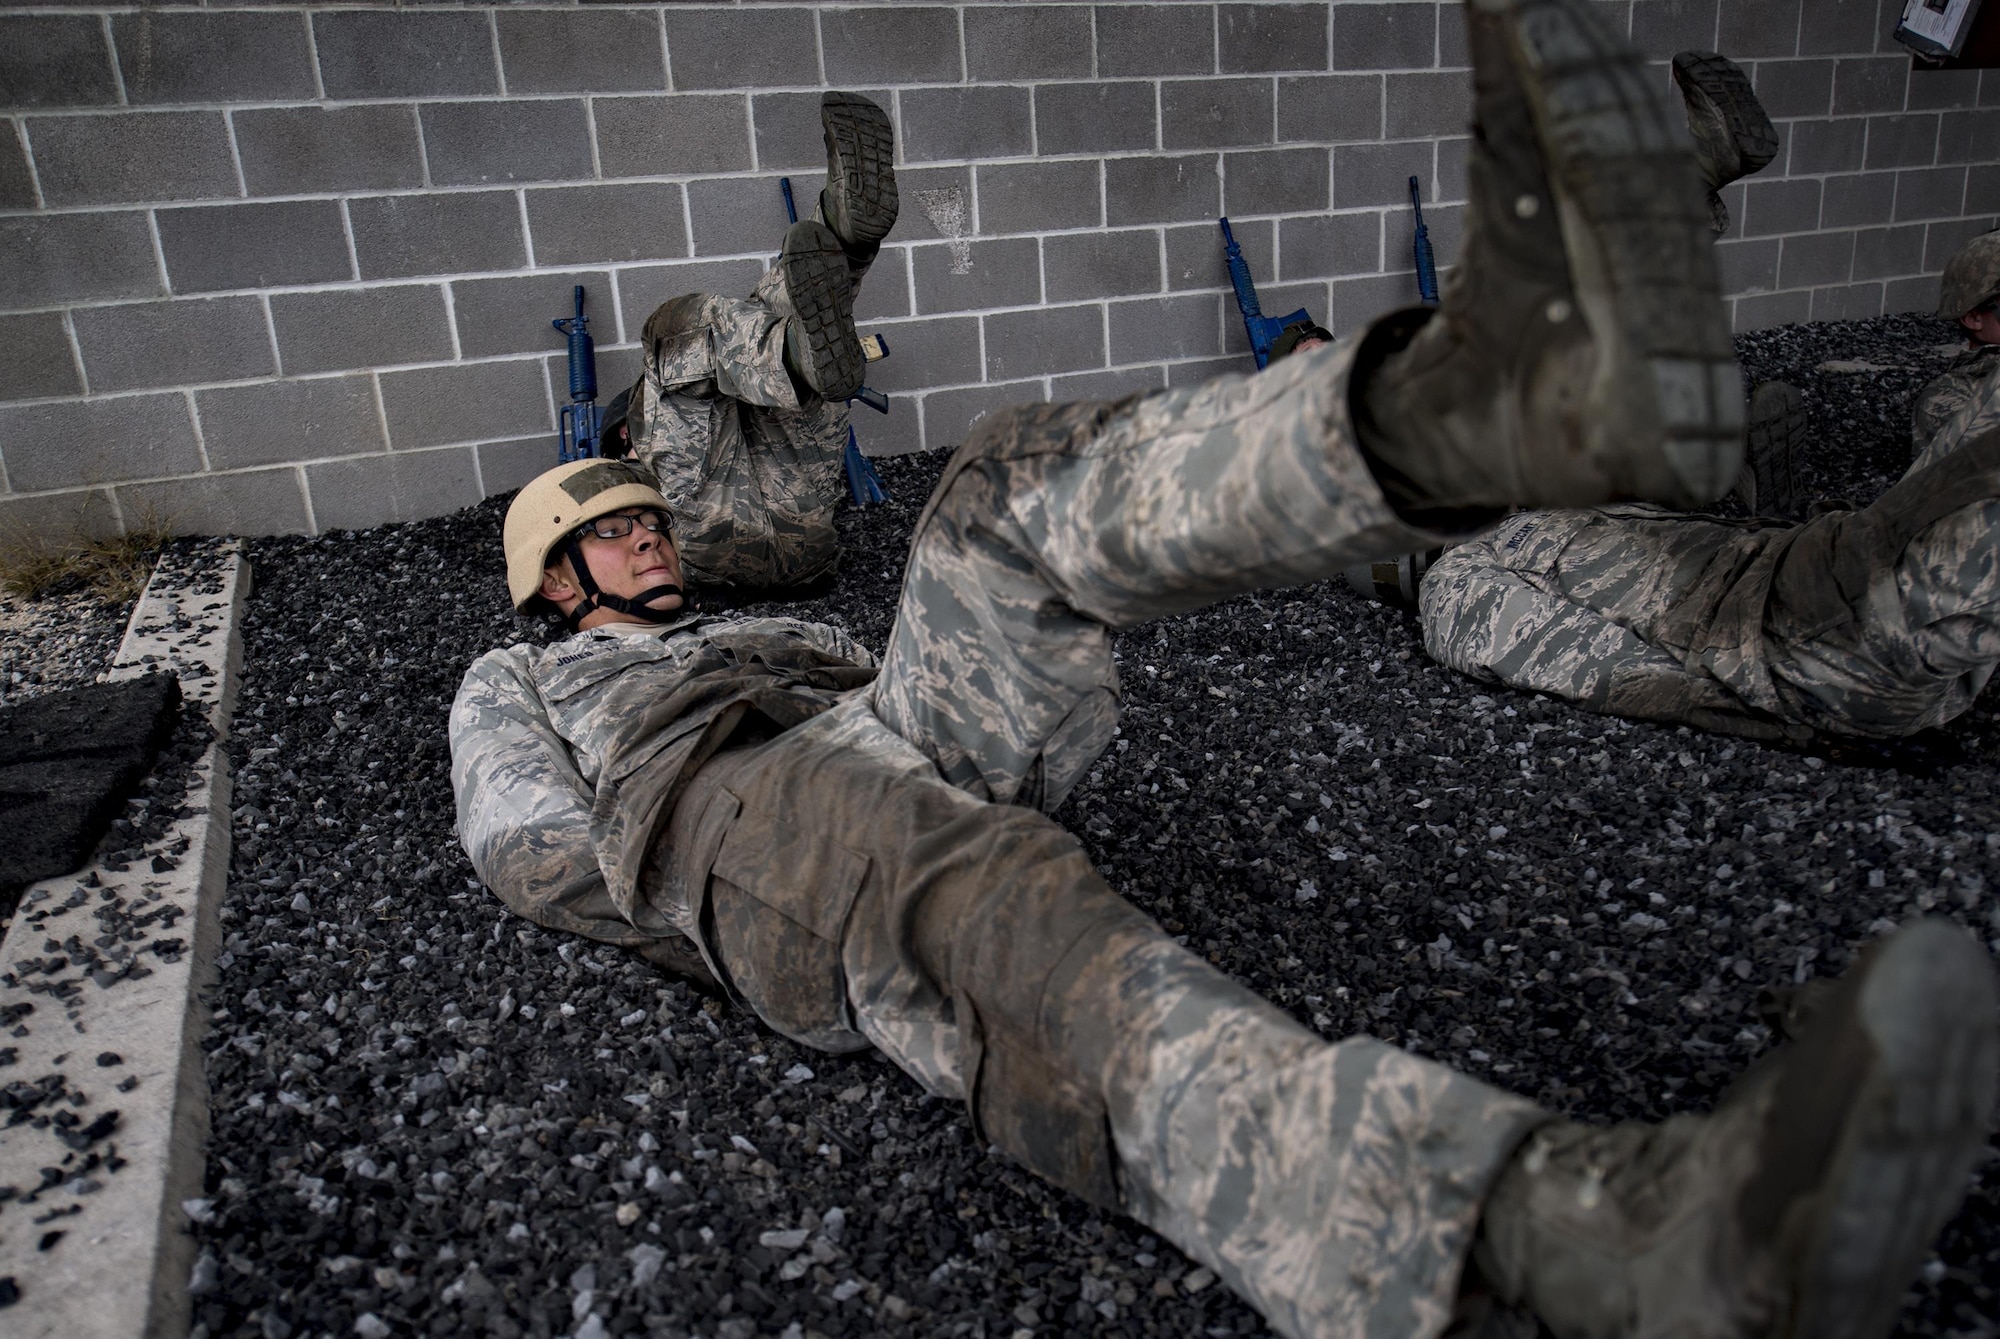 Air Force Academy Cadet Jones conducts flutter kicks during an Air Liaison Officer Aptitude Assessment, Feb. 14, 2017, at Camp Bullis, Texas. The cadets were divided into two groups for the tasked obstacle portion of the assessment, leaving the other group time to work out. (U.S. Air Force photo by Airman 1st Class Daniel Snider)